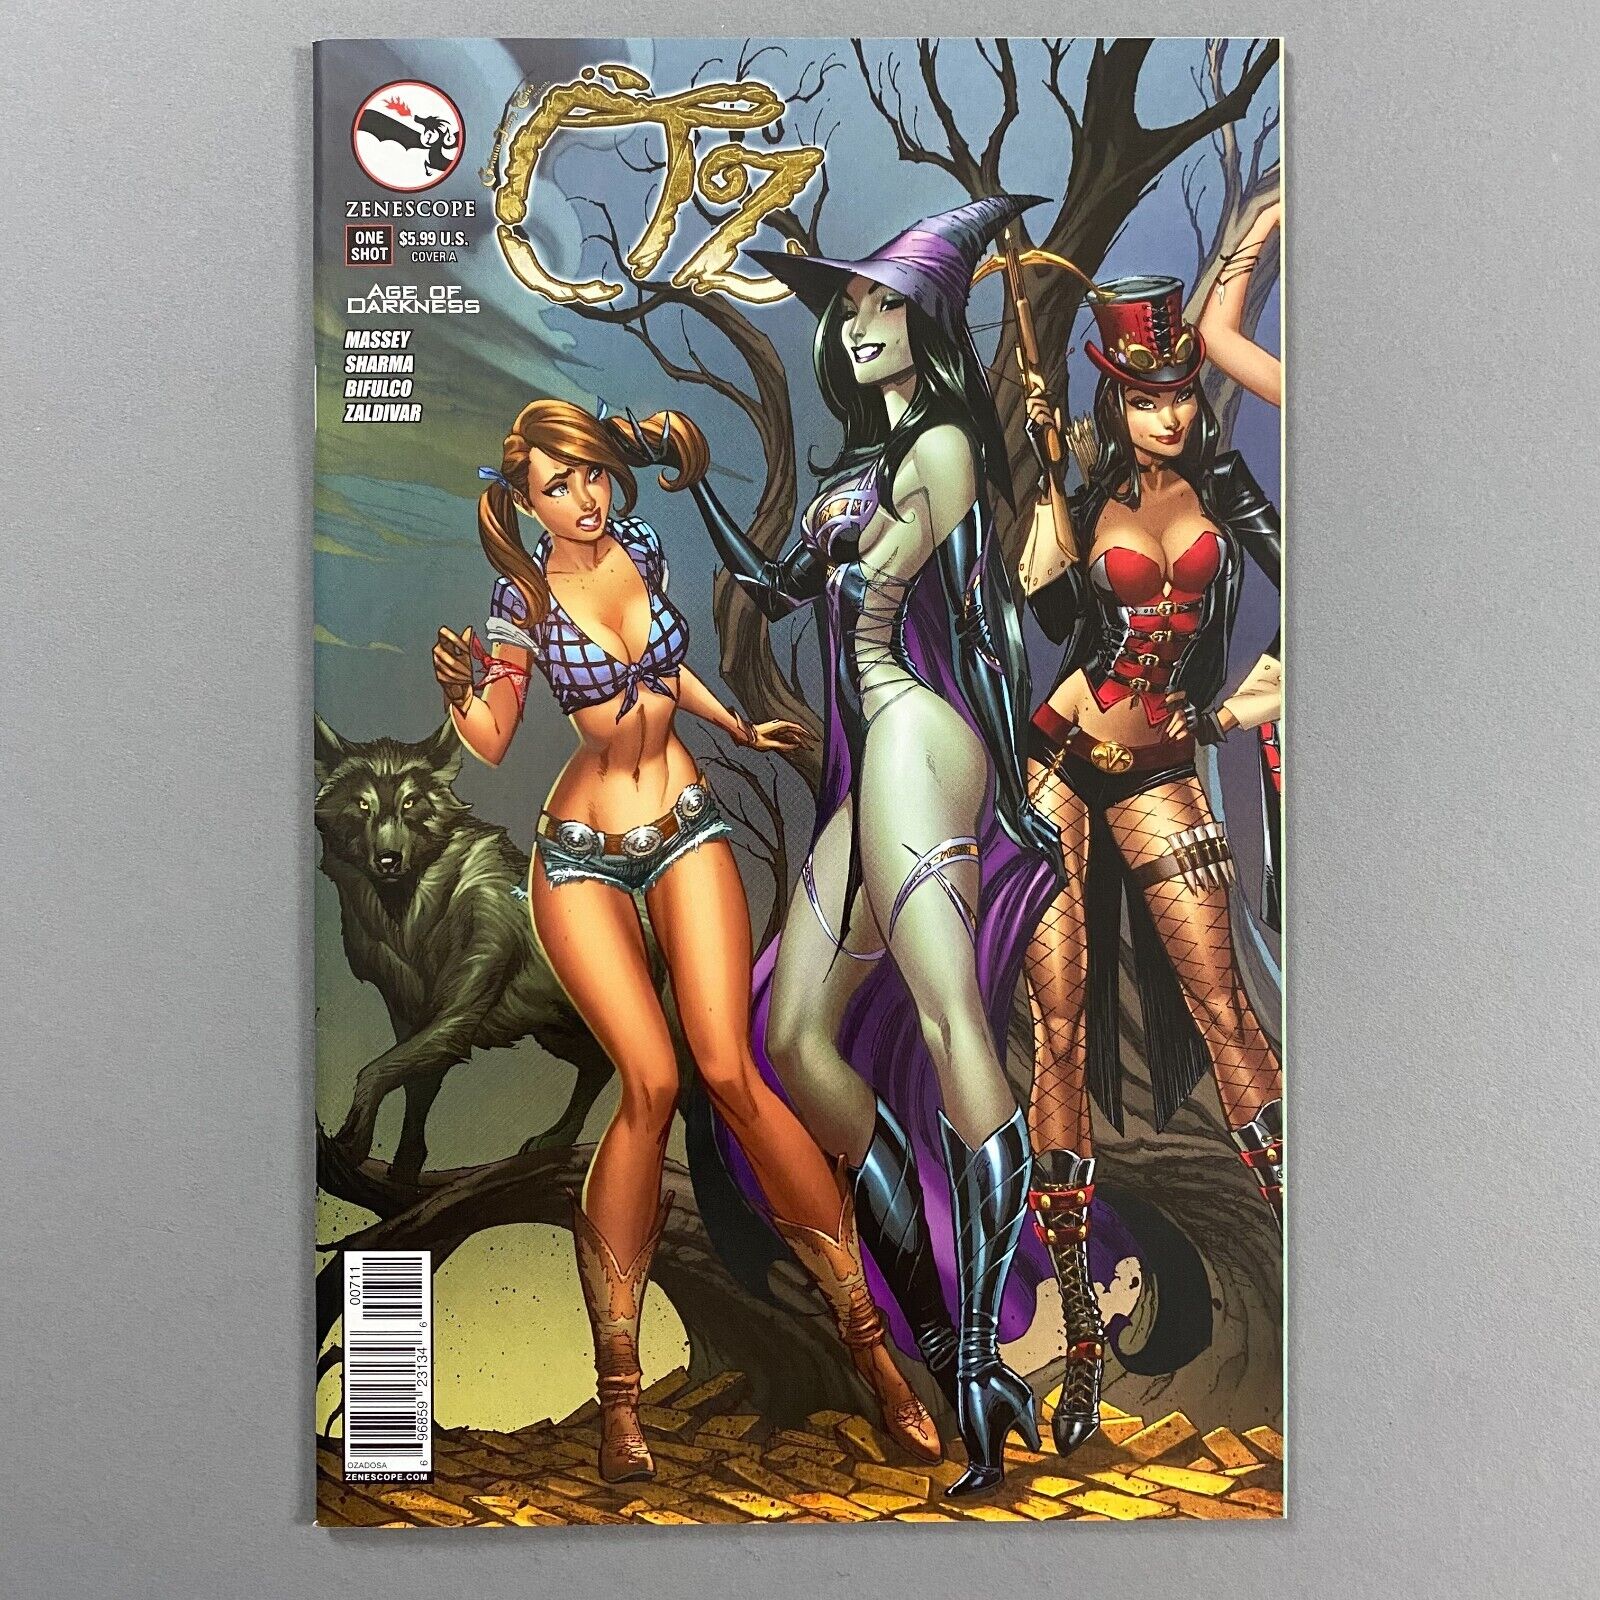 GRIMM FAIRY TALES OZ AGE OF DARKNESS J SCOTT CAMPBELL COVER (2014, ZENESCOPE)